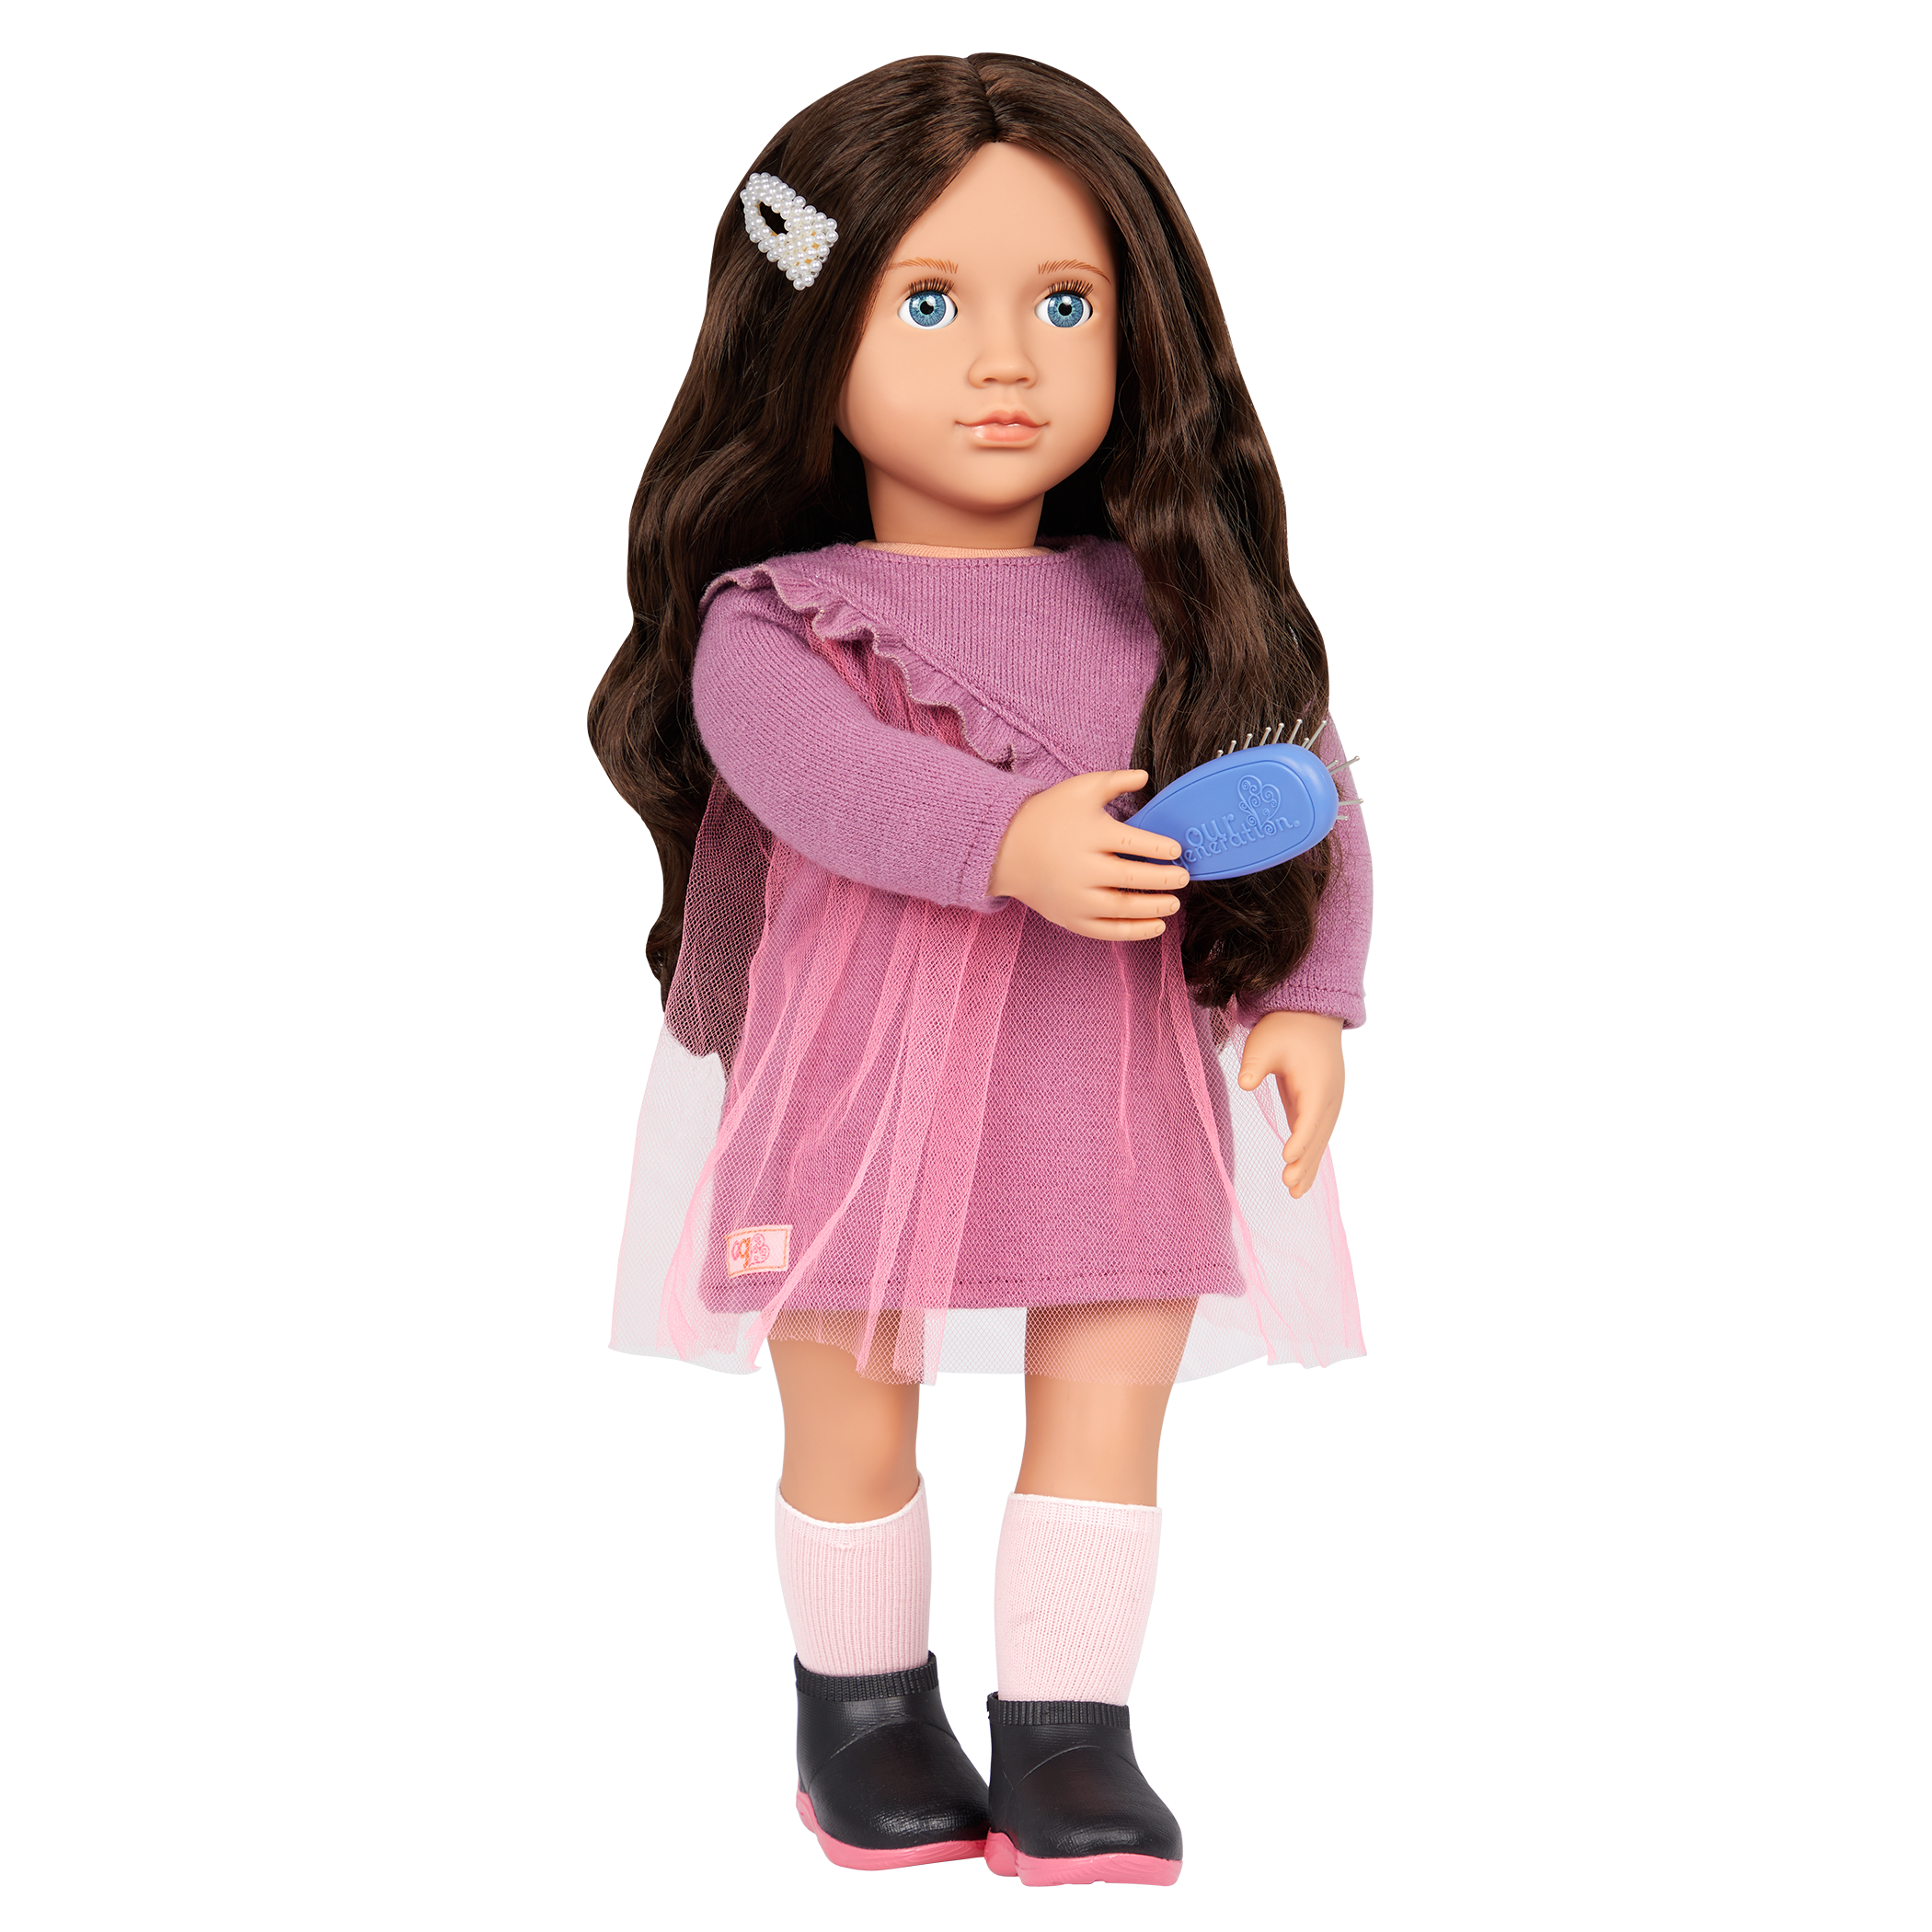 Our Generation Twirls & Pearls Hair Set for 18-inch Dolls